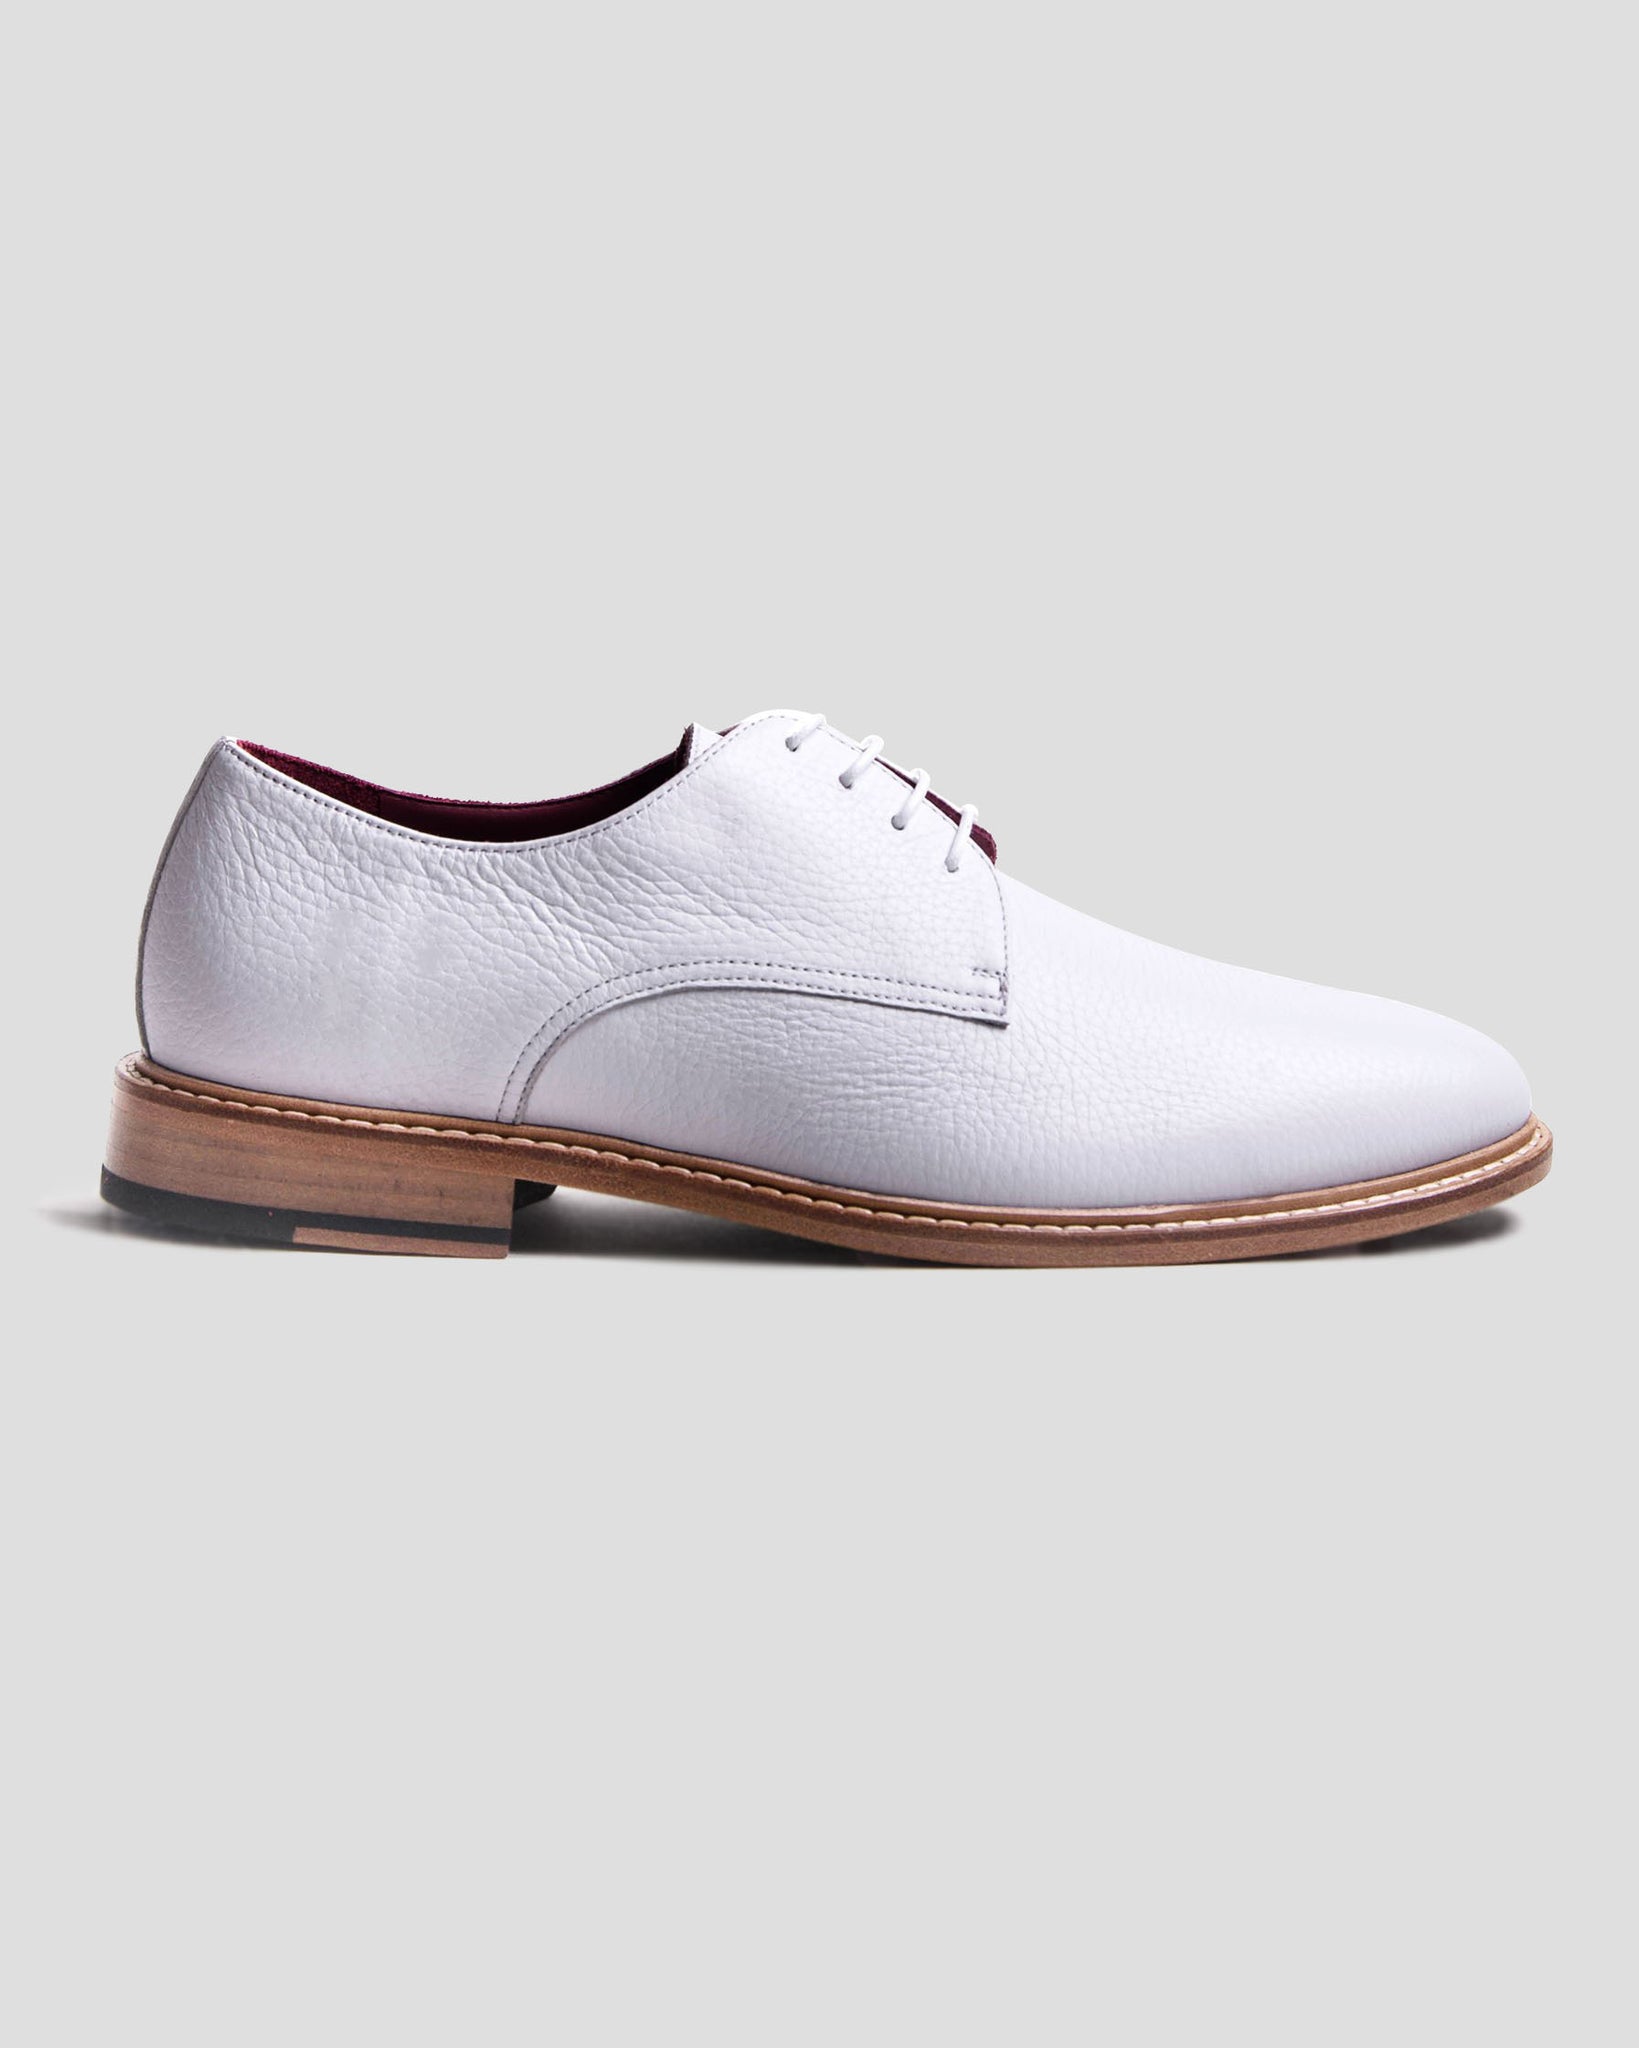 Southern Gents Derby Oxford Shoes - White